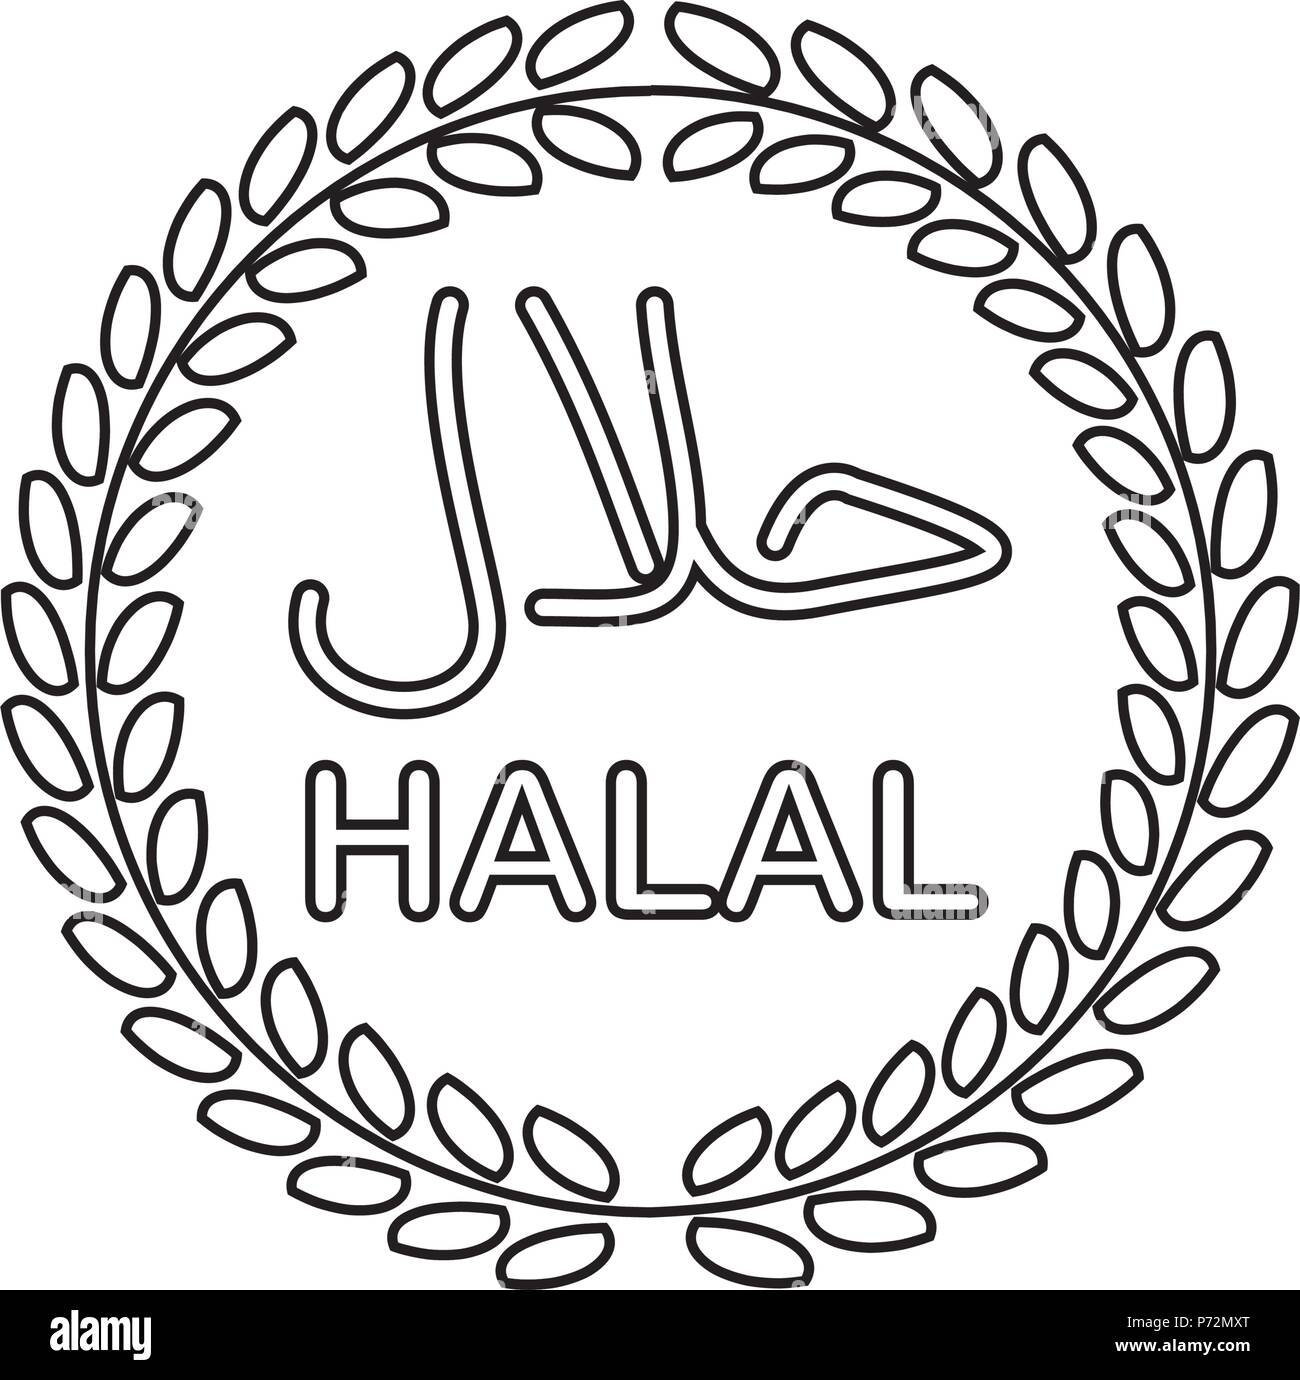 halal label icon vector template Stock Vector